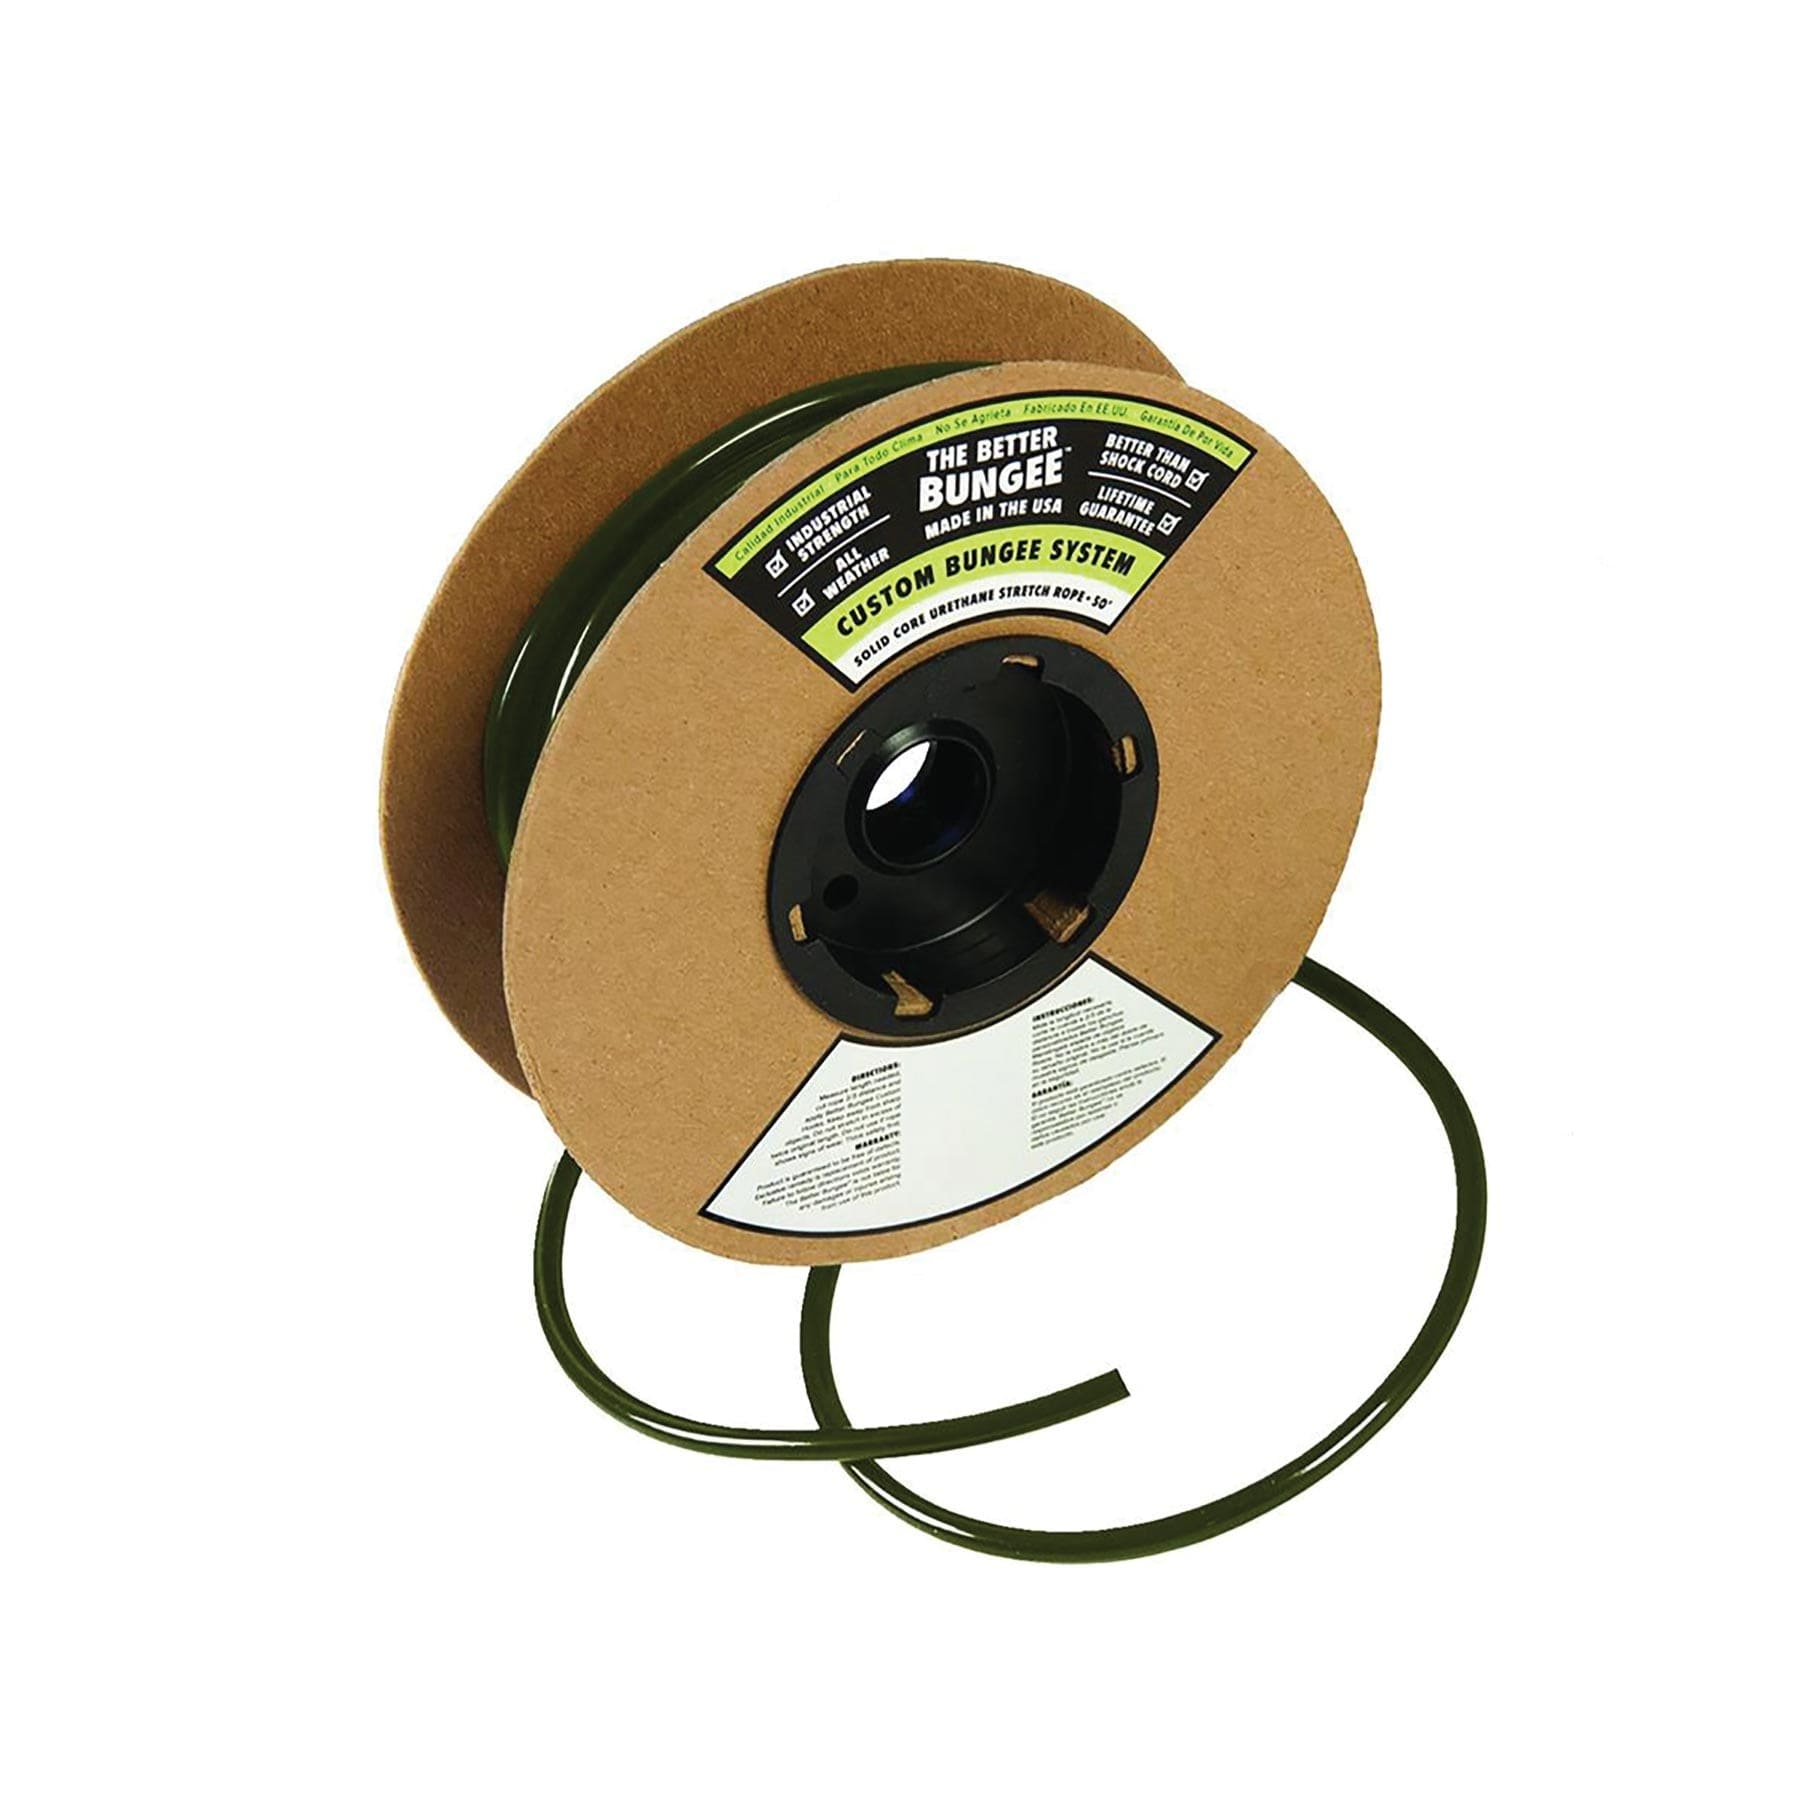 The Better Bungee 50’L Bulk Bungee Cord